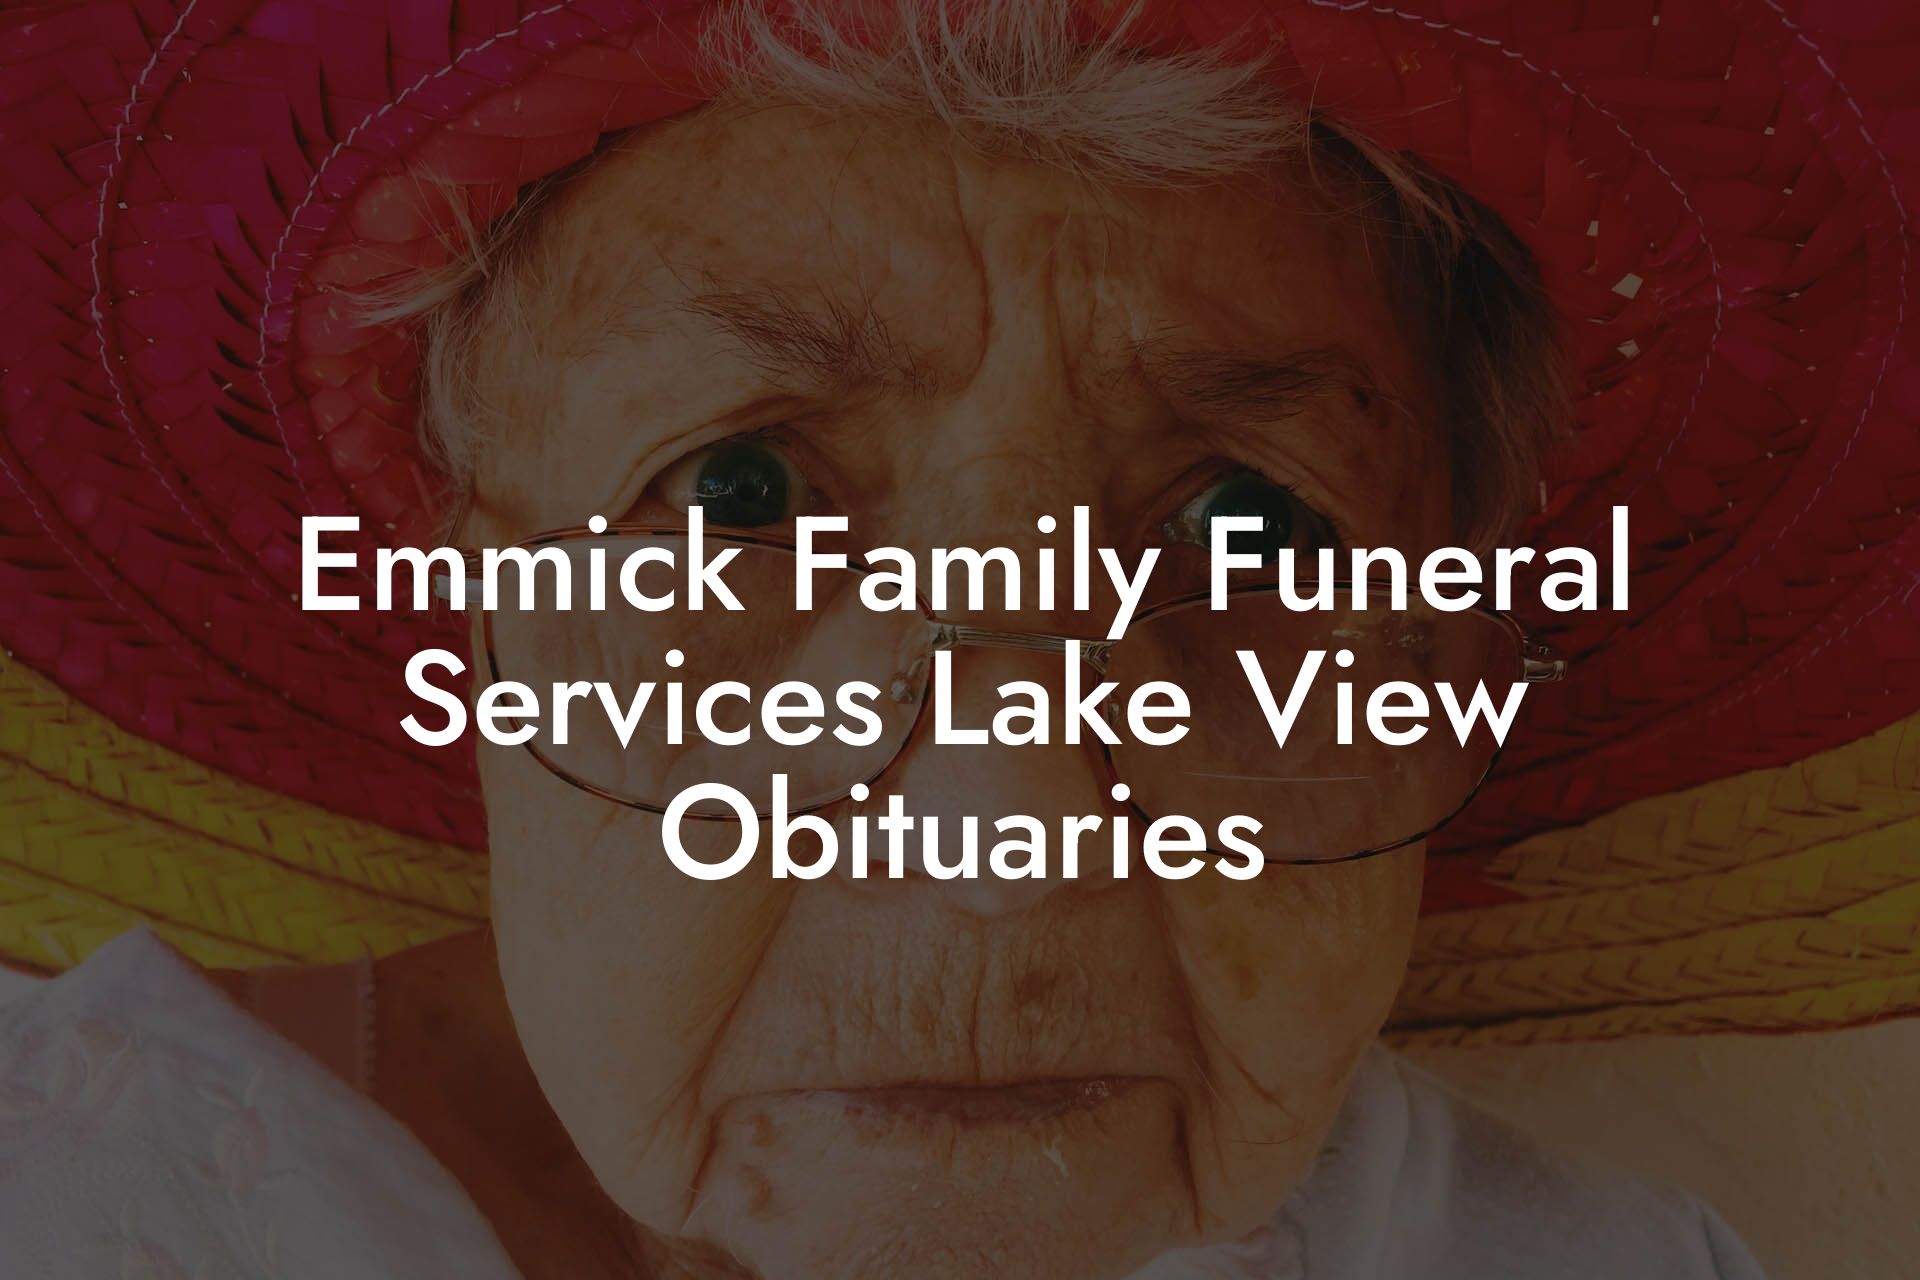 Emmick Family Funeral Services Lake View Obituaries